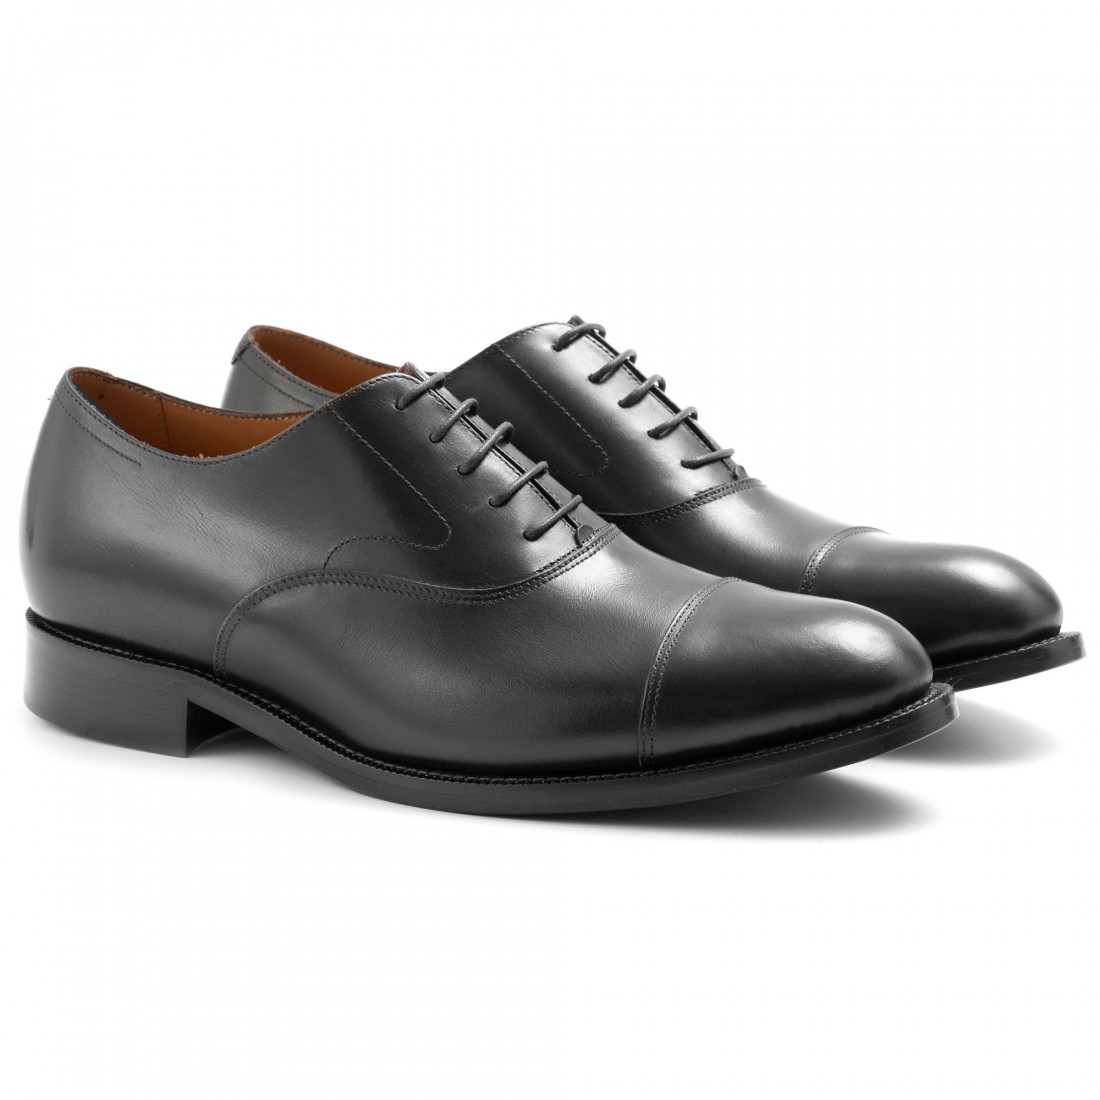 Men's Botti handmade oxford black shoes with removable footbed